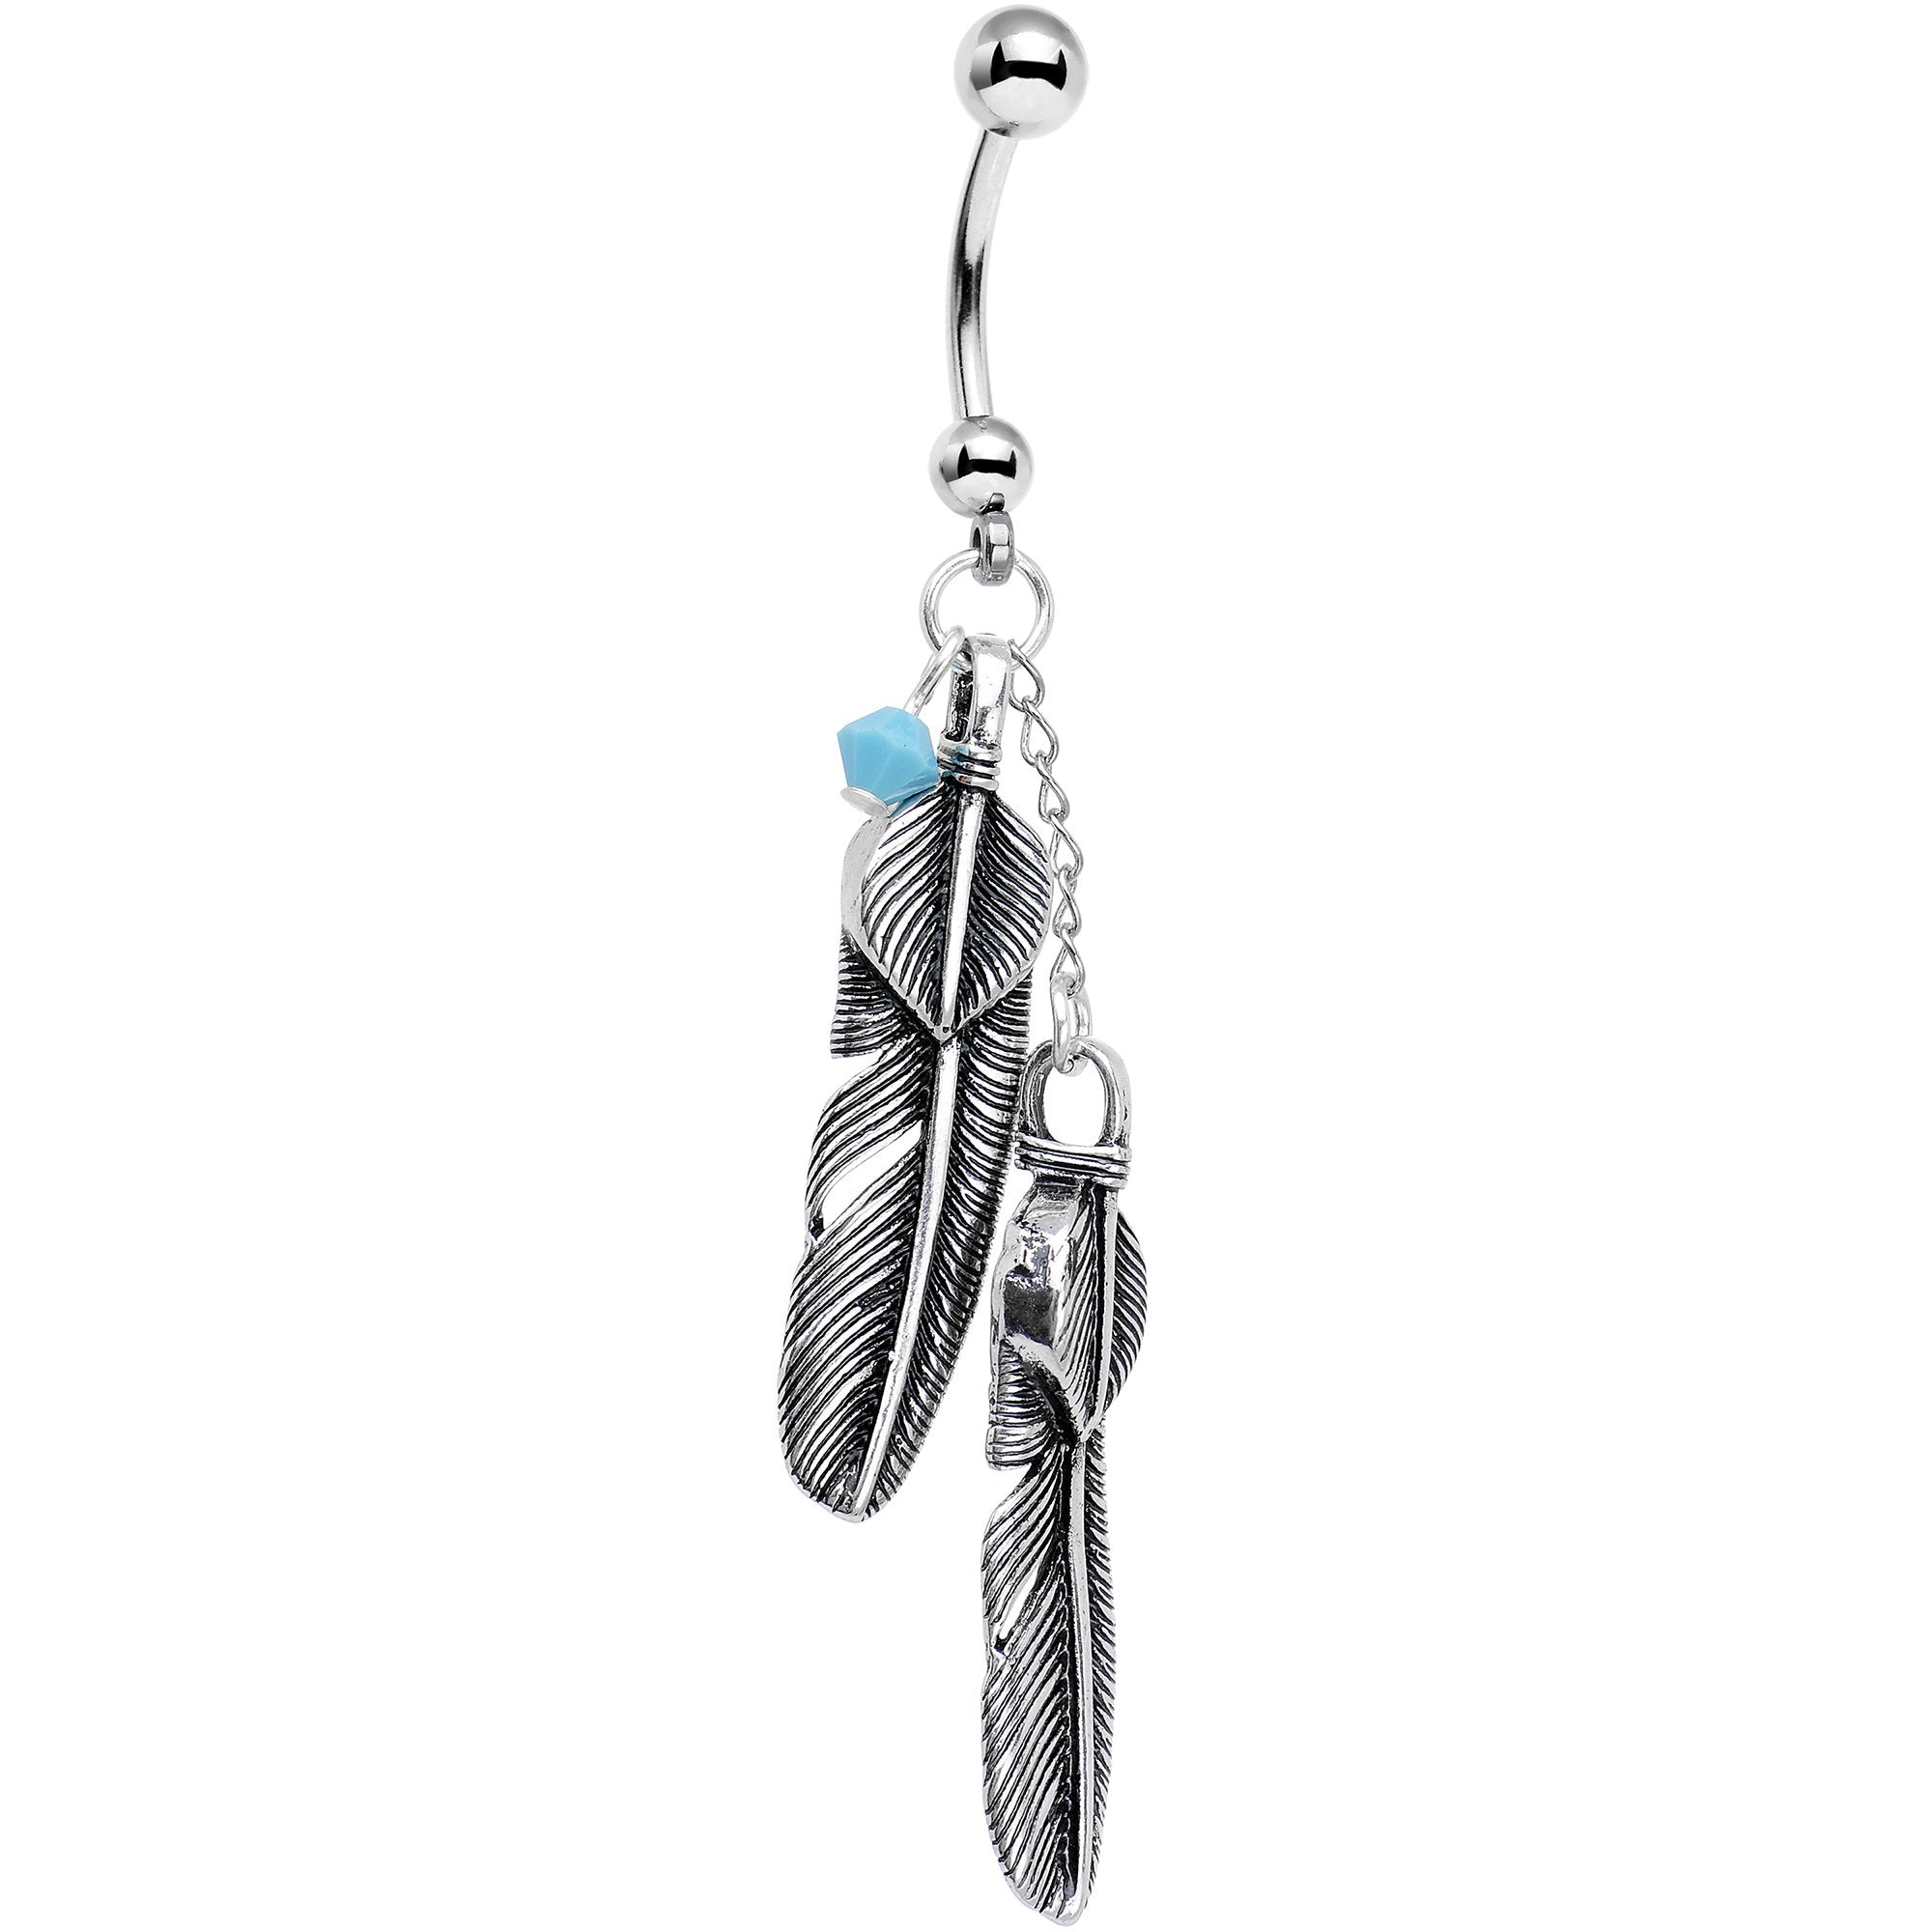 Handmade Blue Gem Feather Belly Ring Created with Crystals